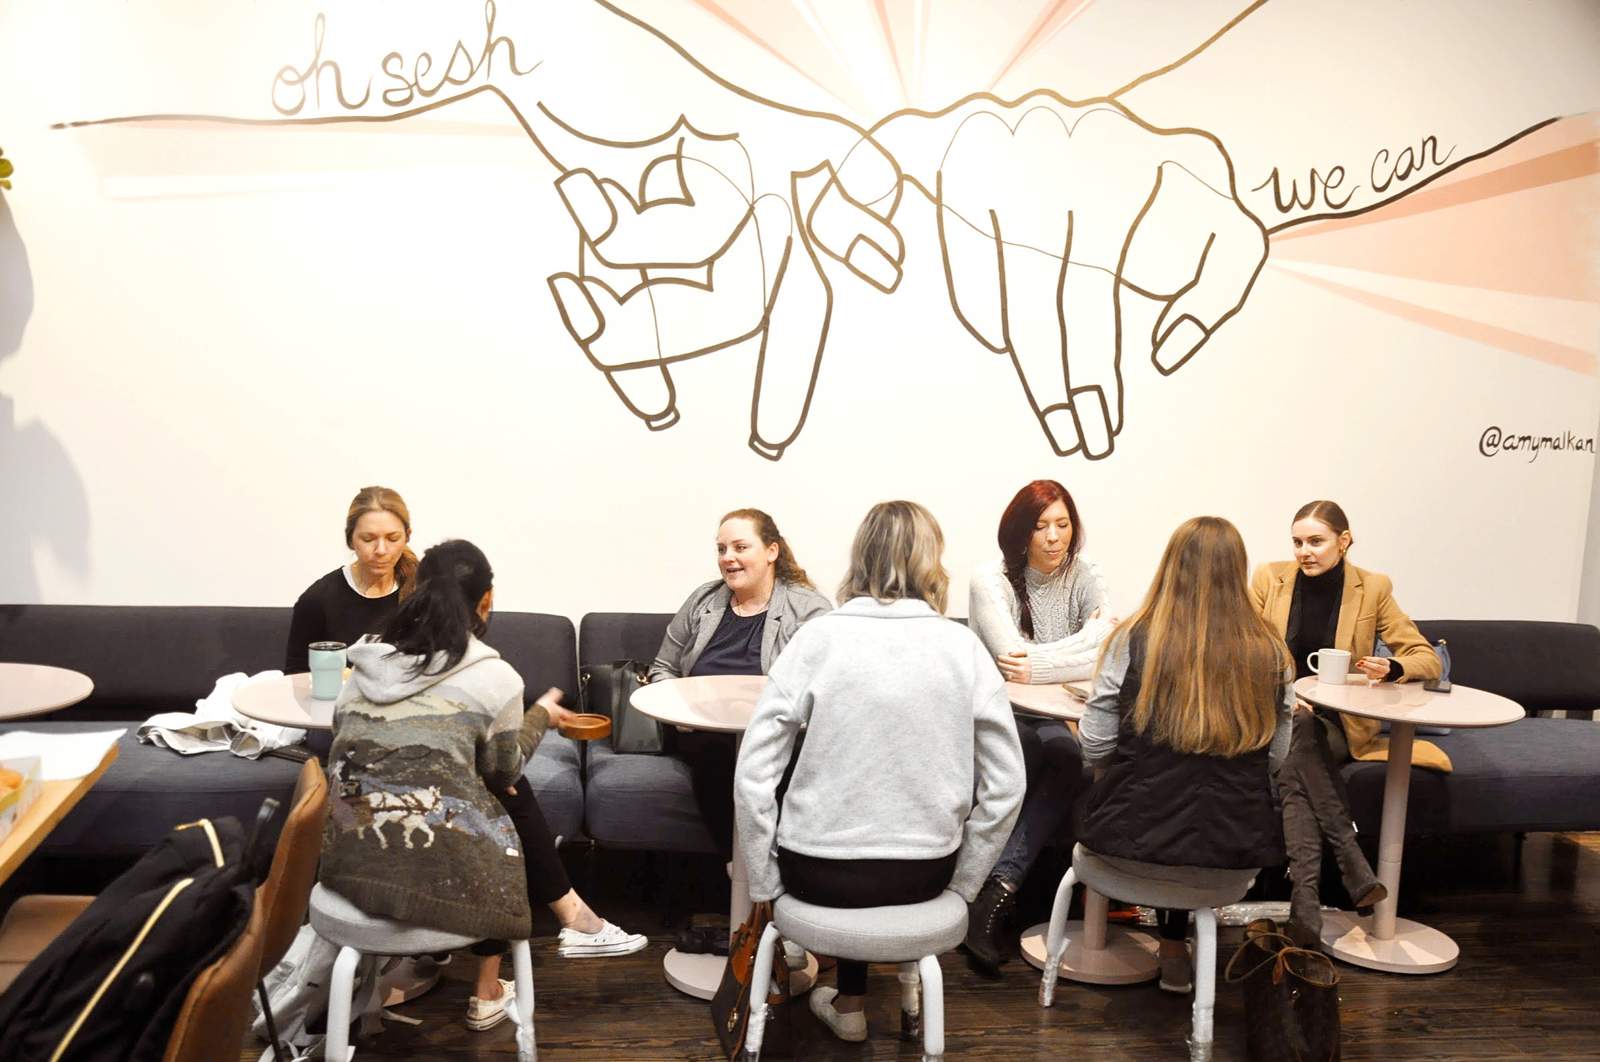 Houston’s first female-focused workspace opens